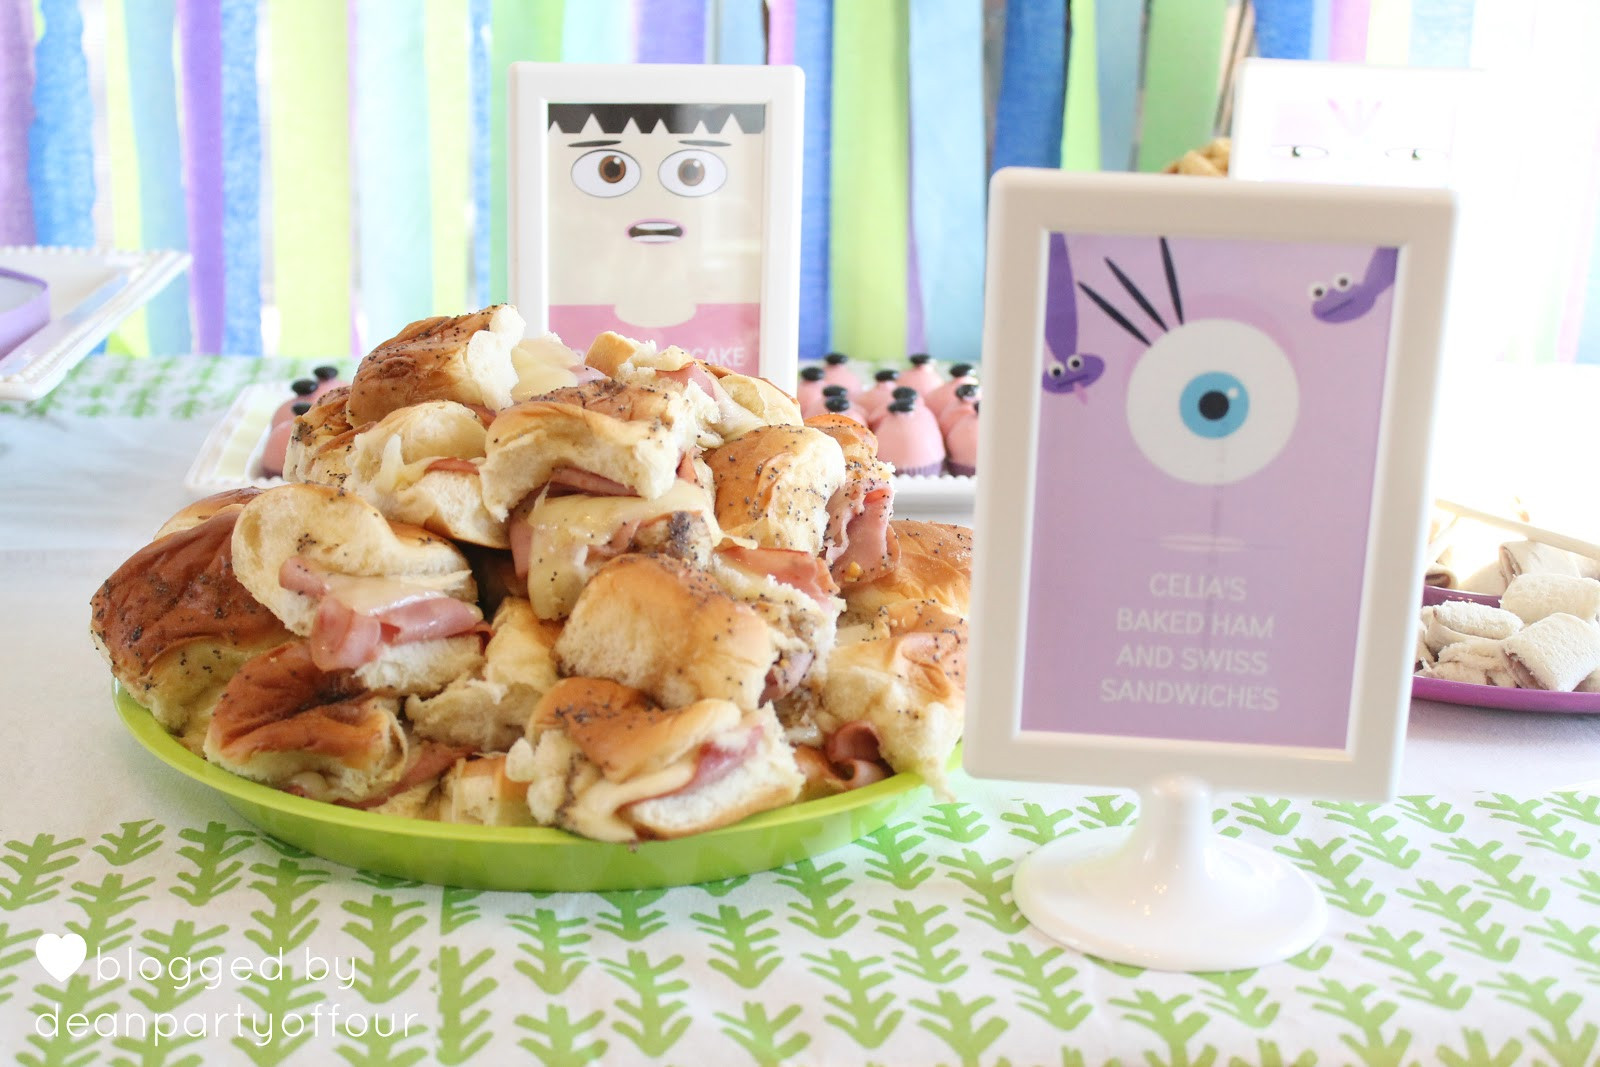 Monsters Inc Birthday Party Food Ideas
 Monster inc party food Cecilia s baked ham and Swiss